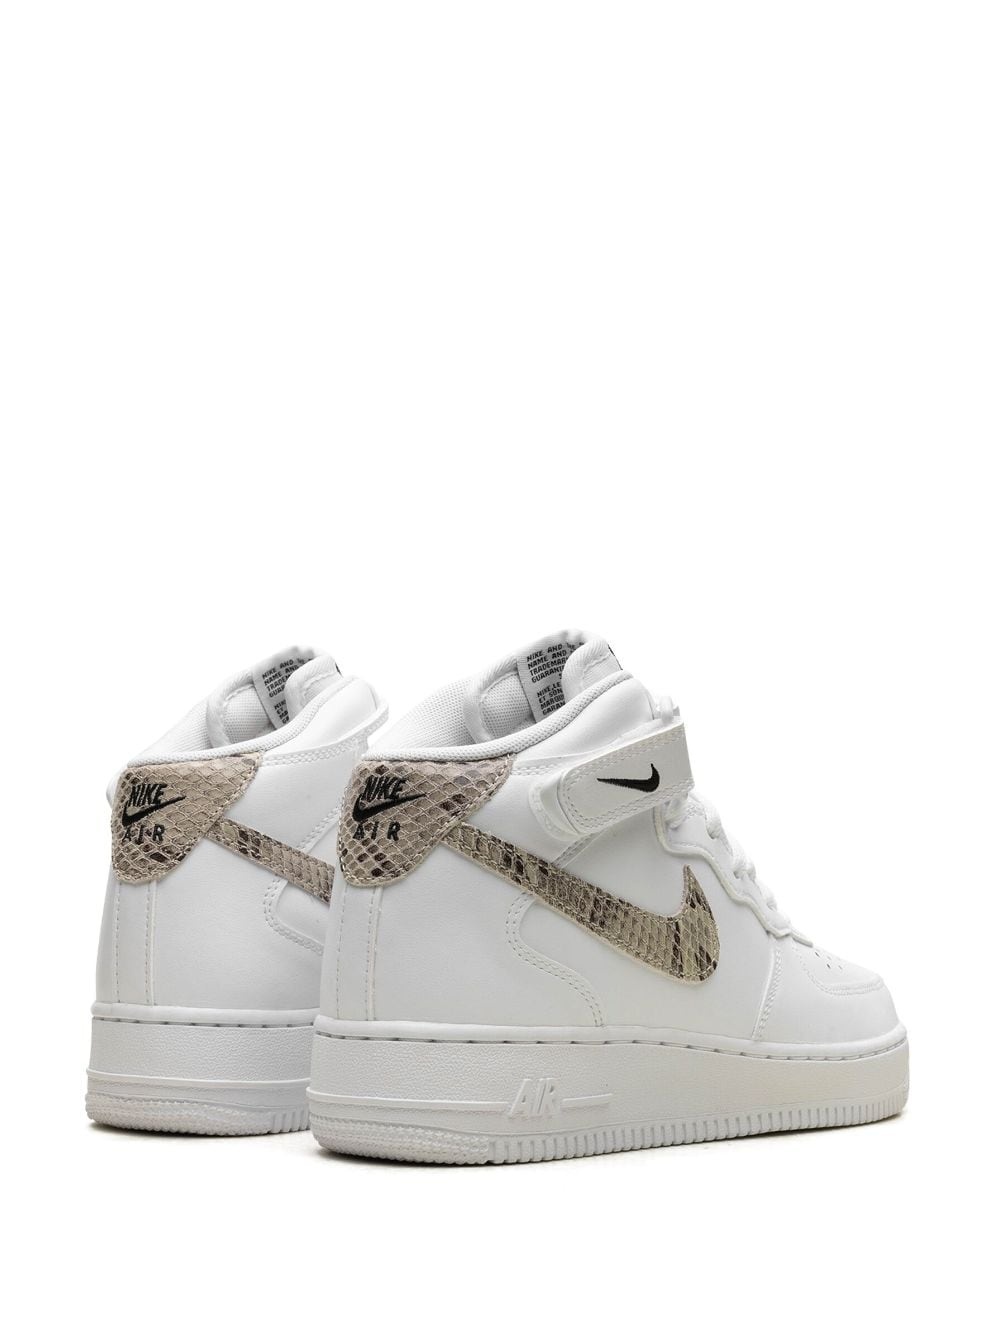 Air Force 1 '07 Mid "White/Snake Swoosh" sneakers - 3